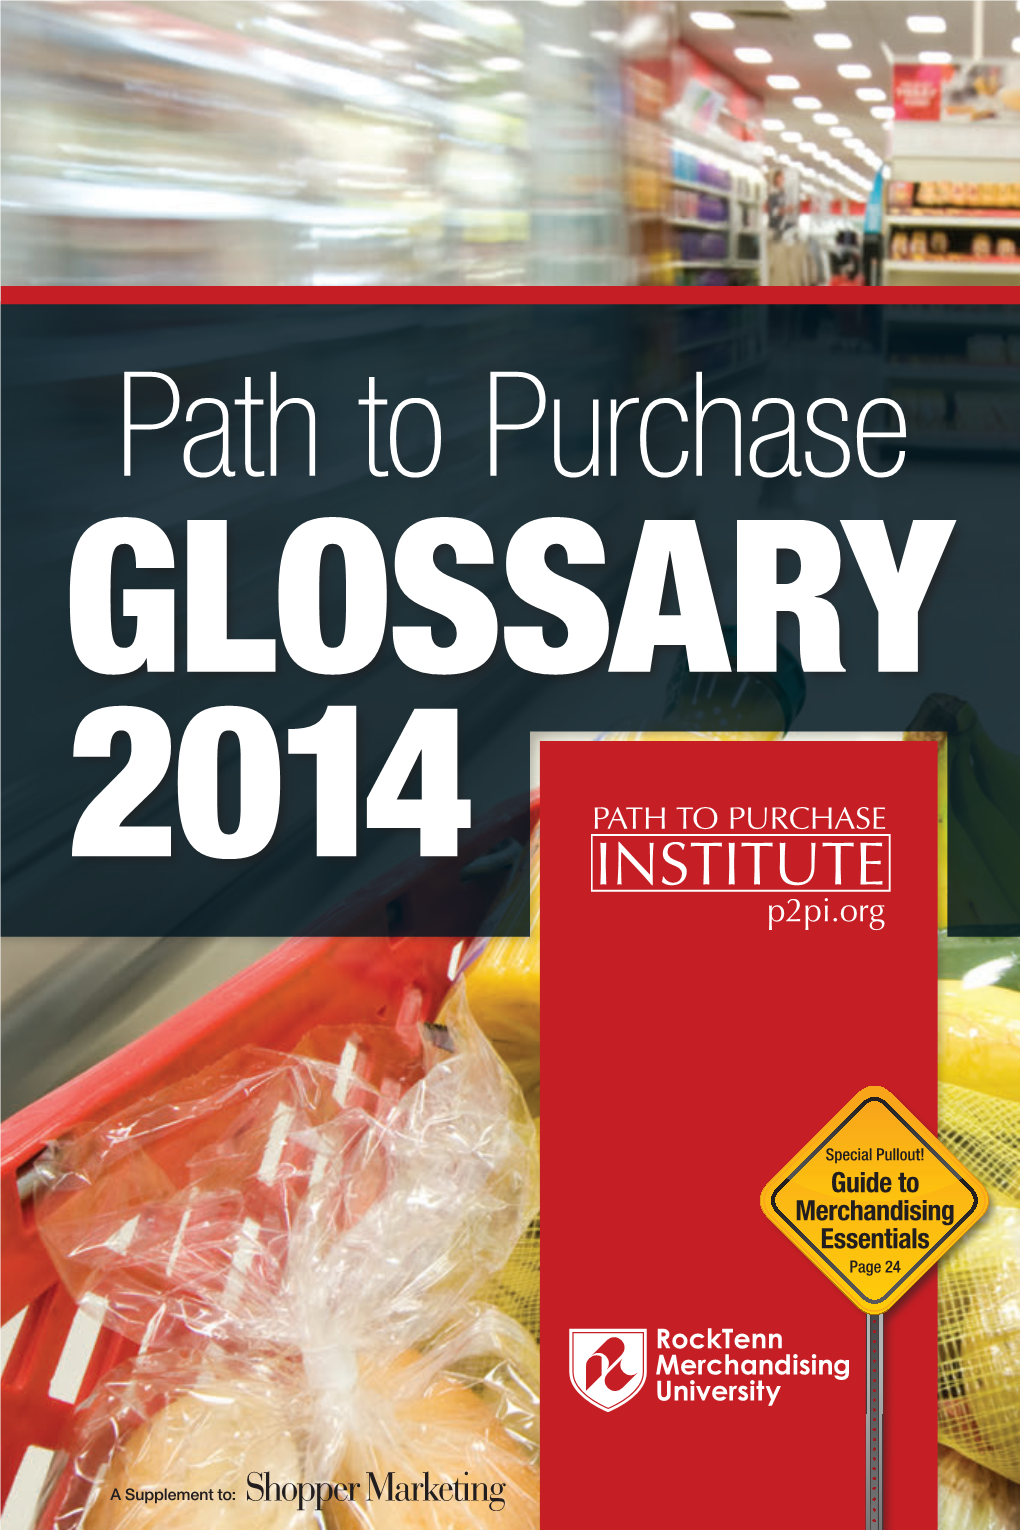 Join Us at These 2014 Institute Events